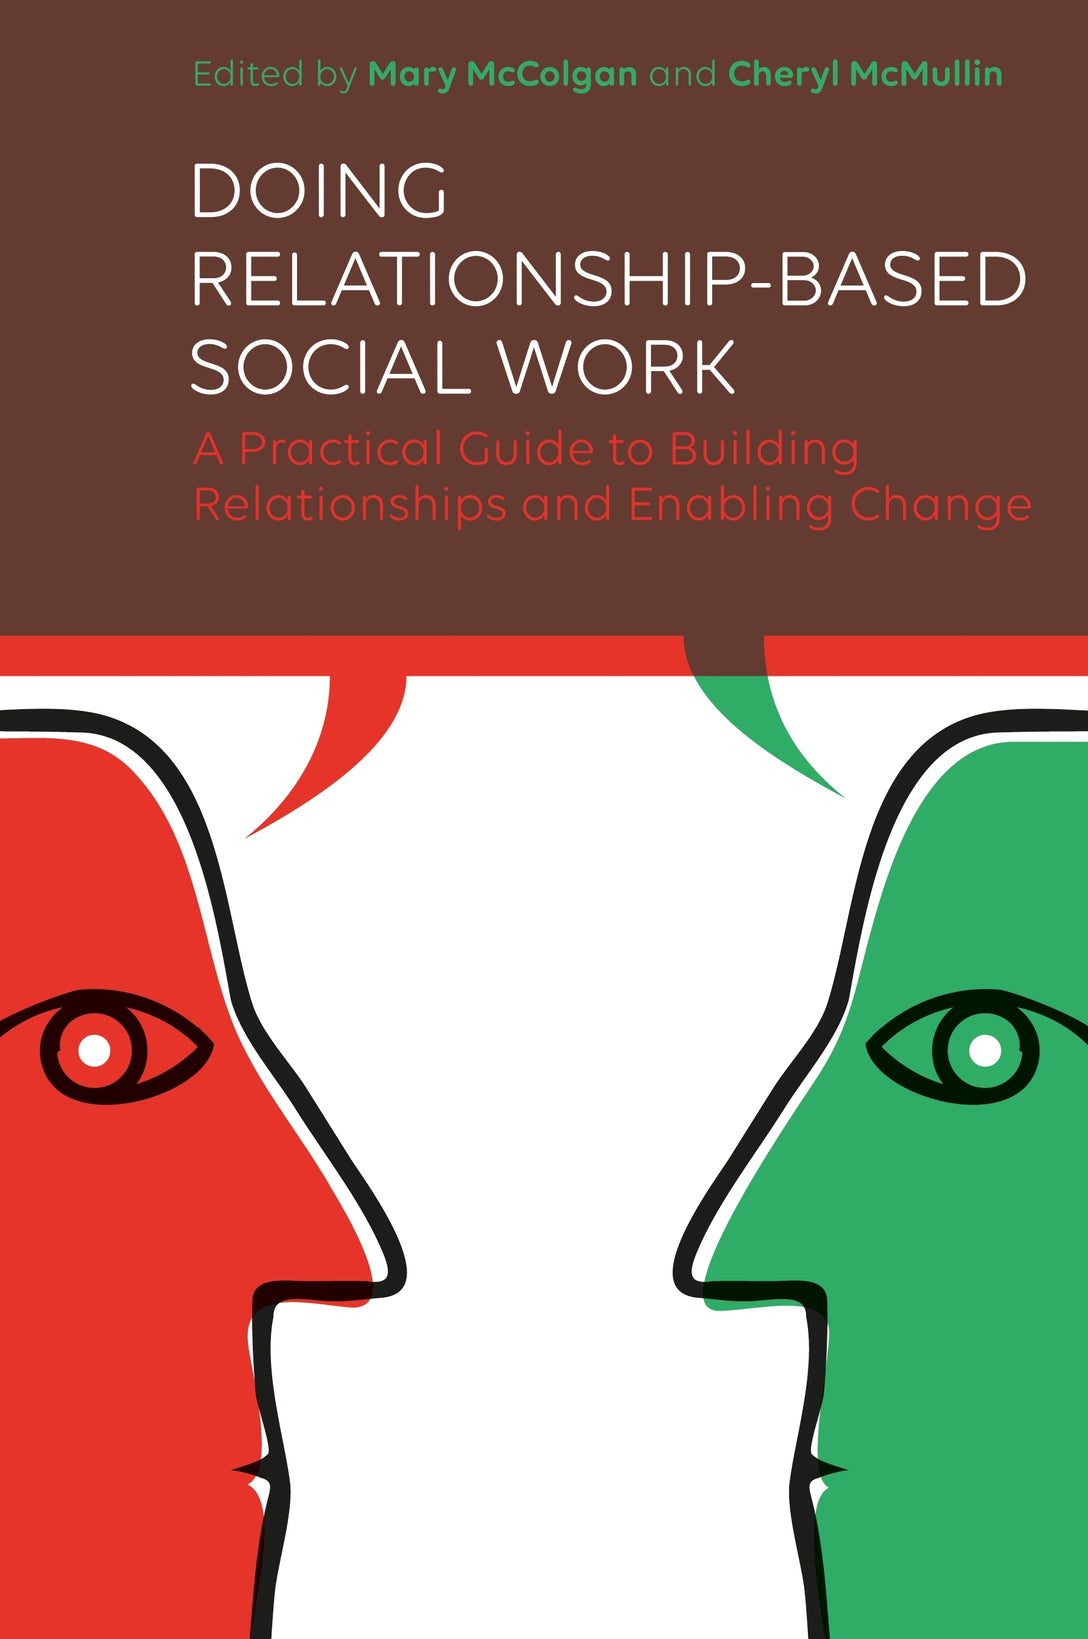 Doing Relationship-Based Social Work by Mary McColgan, Cheryl McMullin, No Author Listed